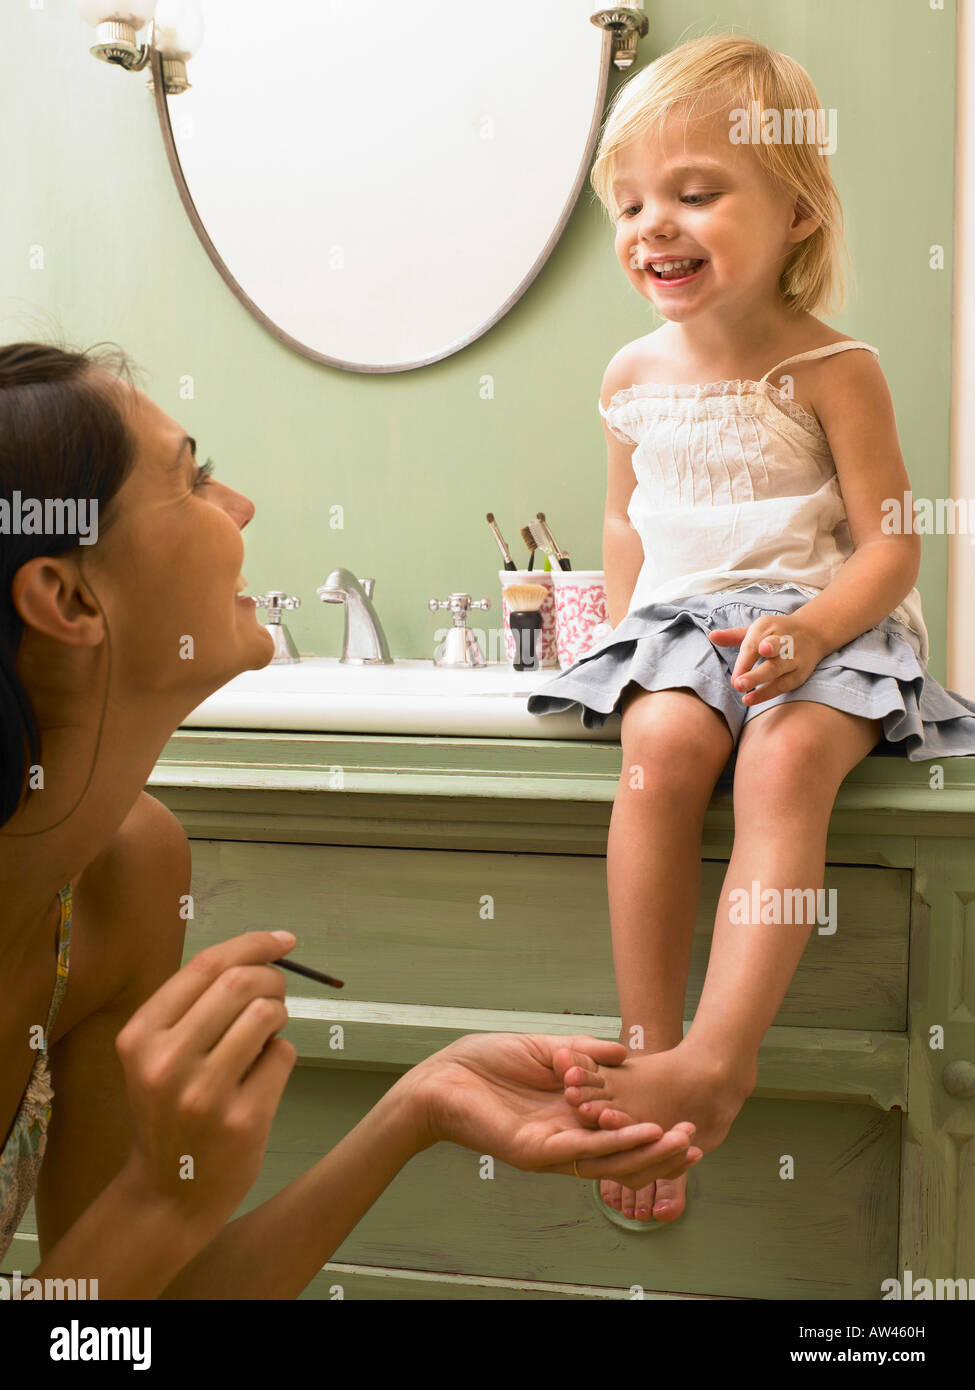 Mother and daughter applying makeup. Stock Photo